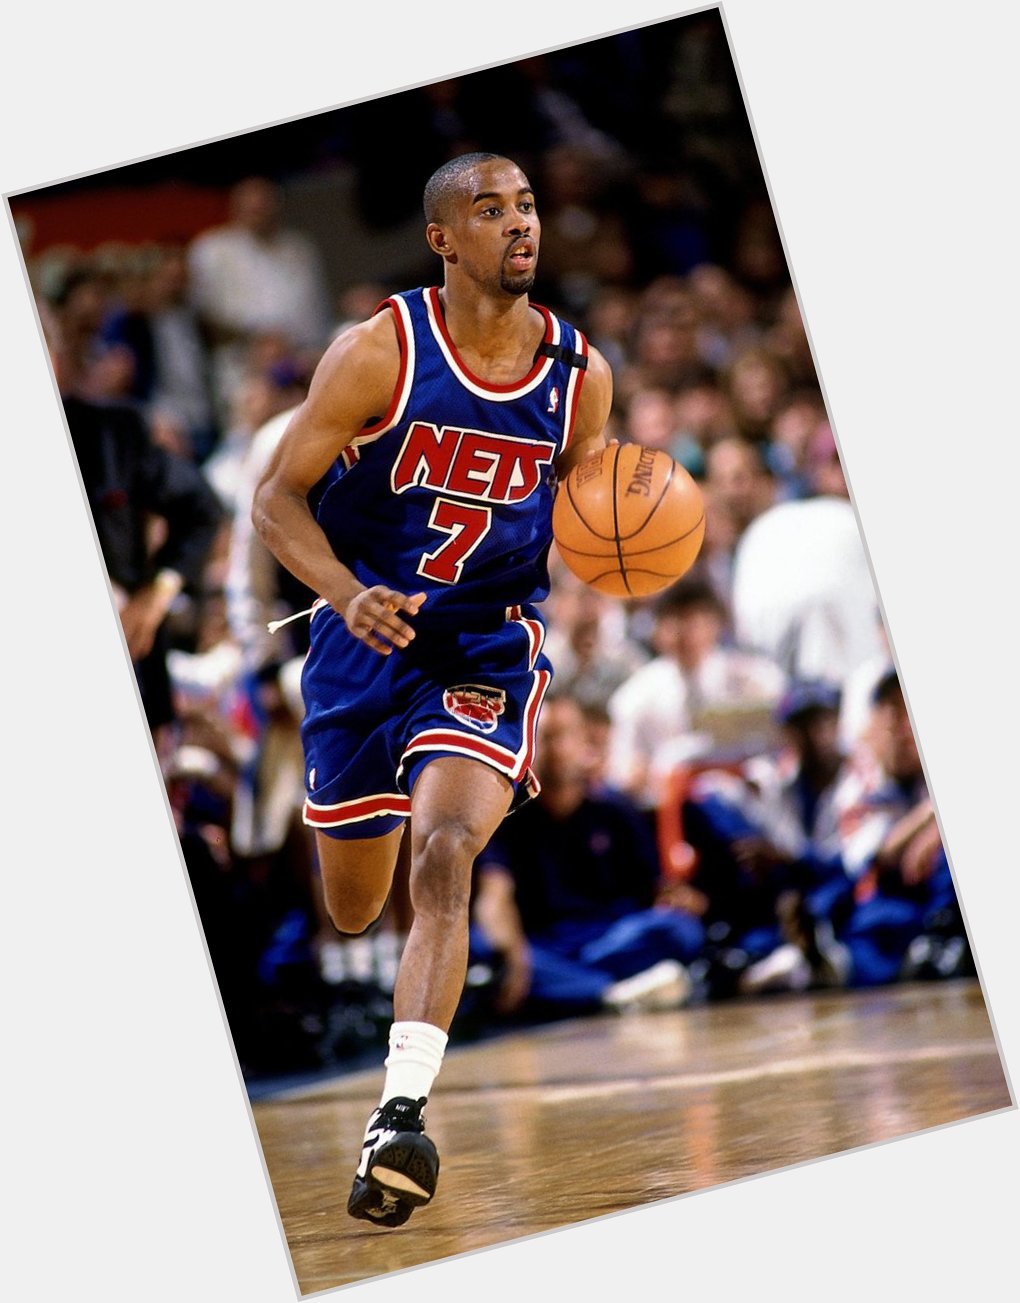 Happy Birthday to Kenny Anderson who turns 47 today! 